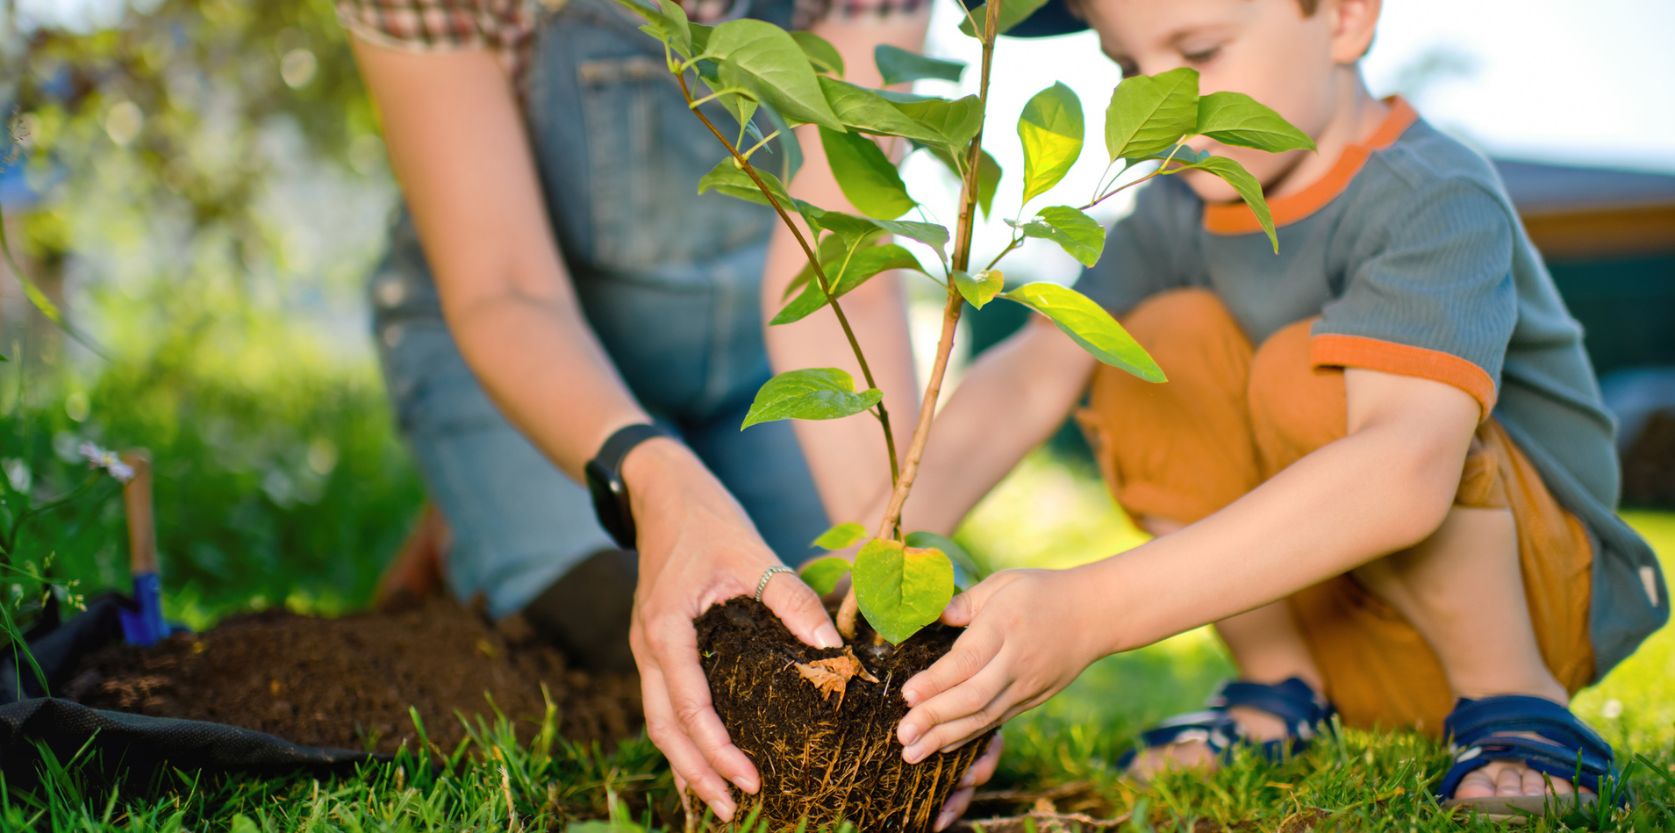 04-5-Reasons-to-Plant-a-Tree-in-Your-Yard_Blog.jpg